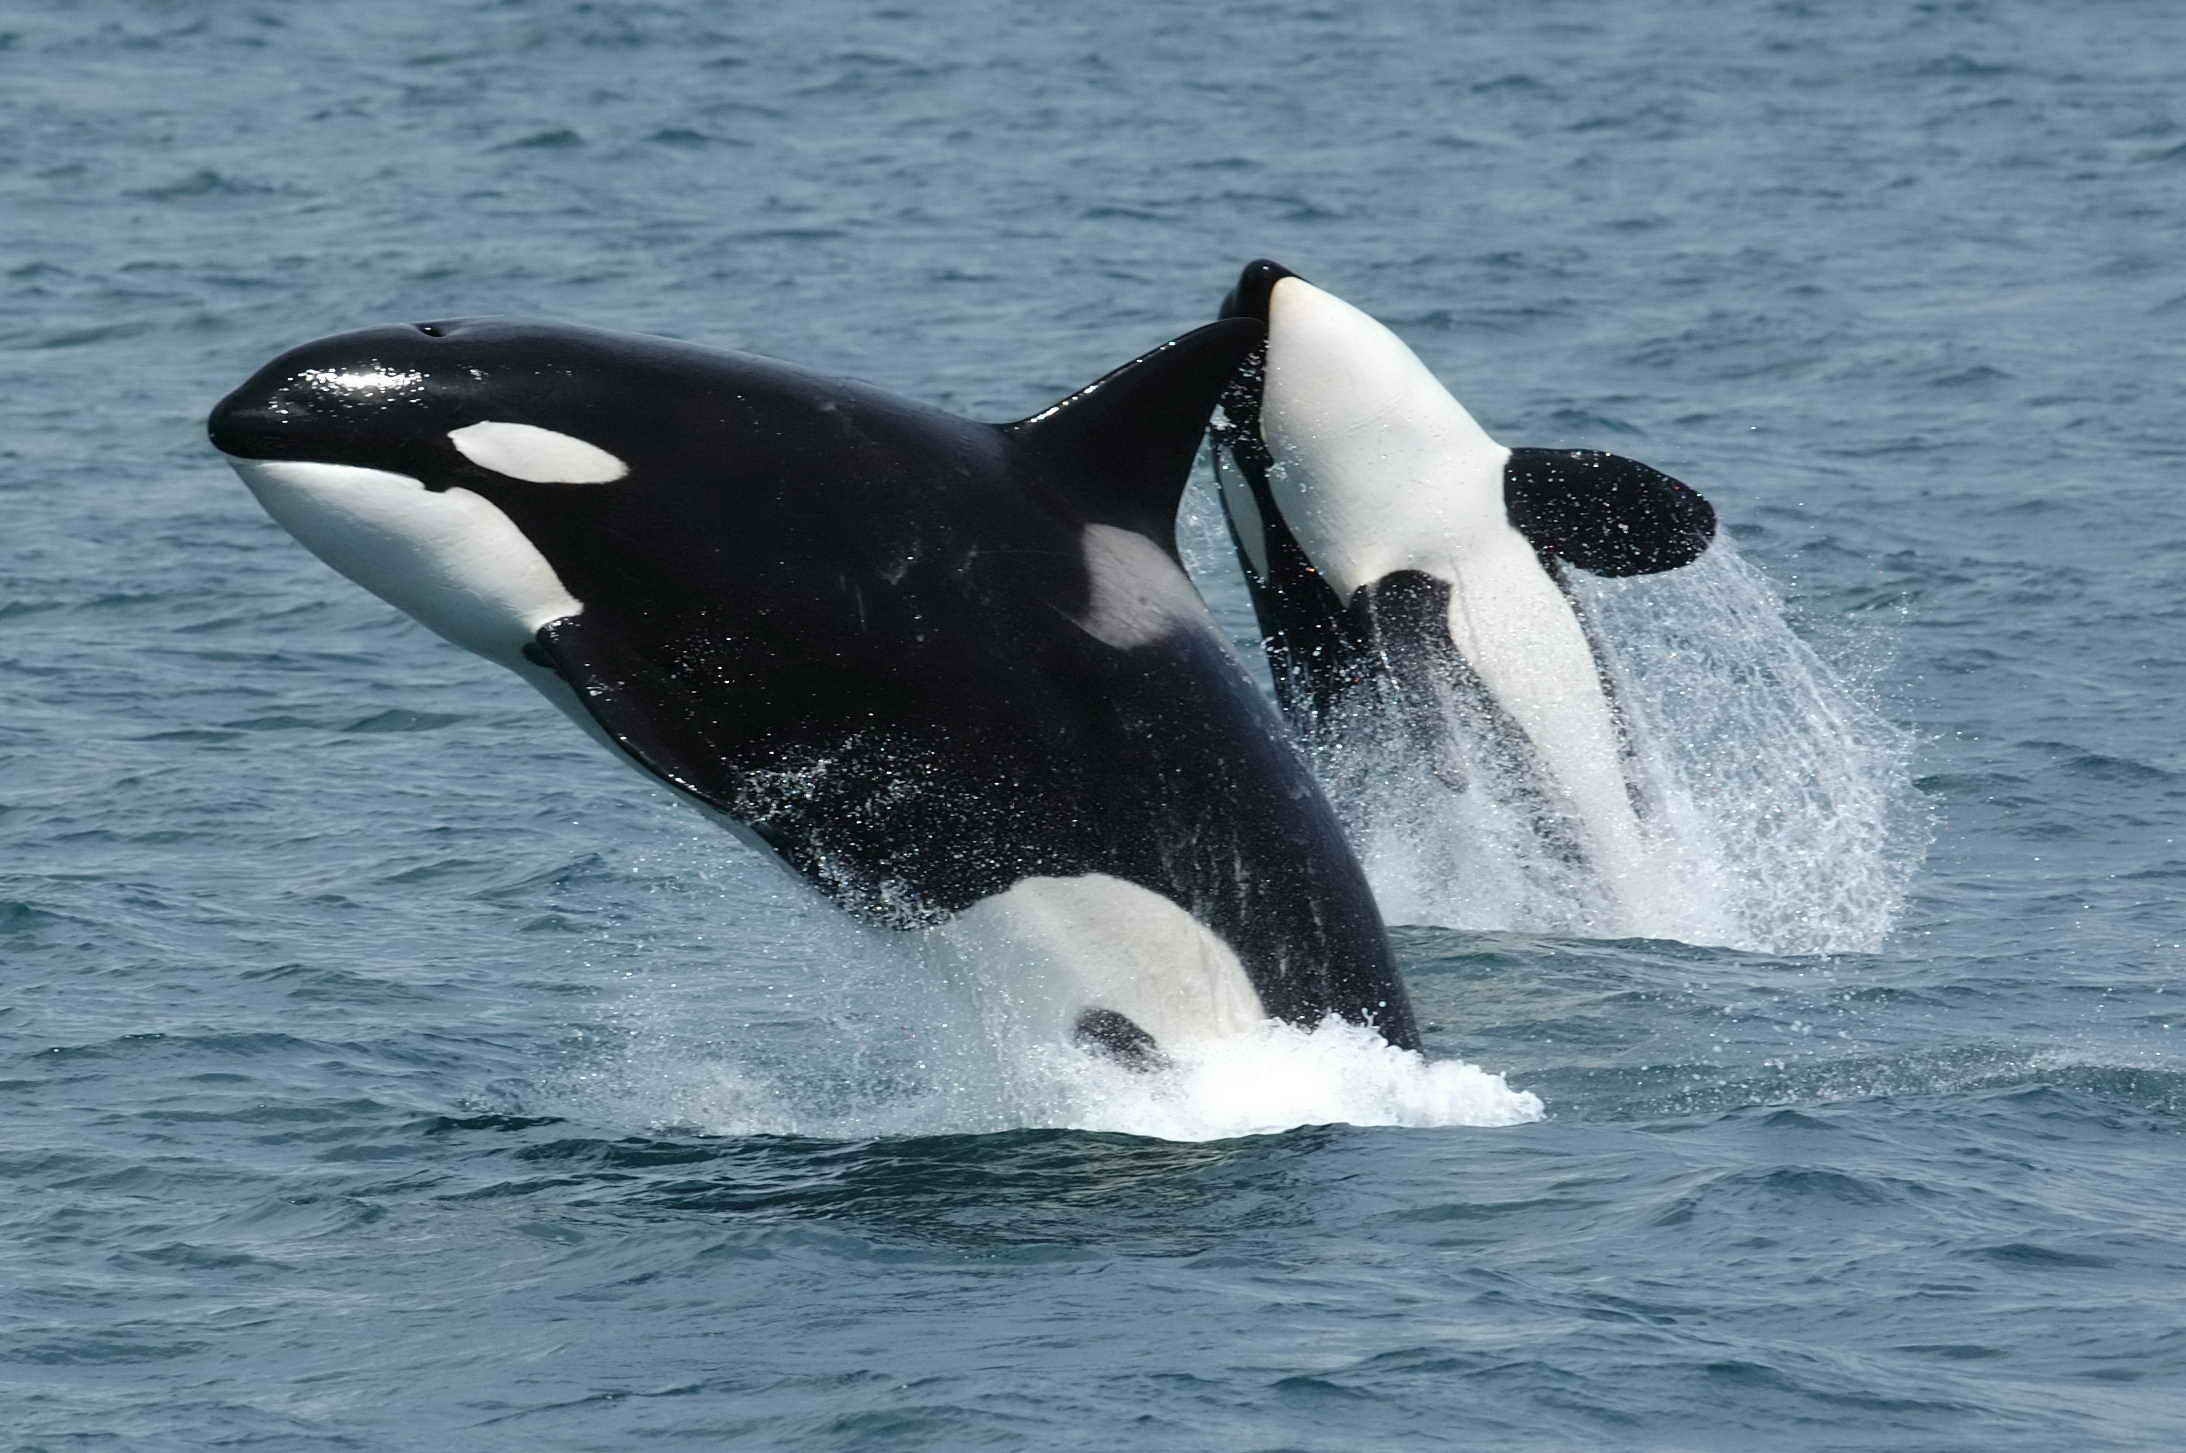 Two orcas breaching the surface of the ocean.